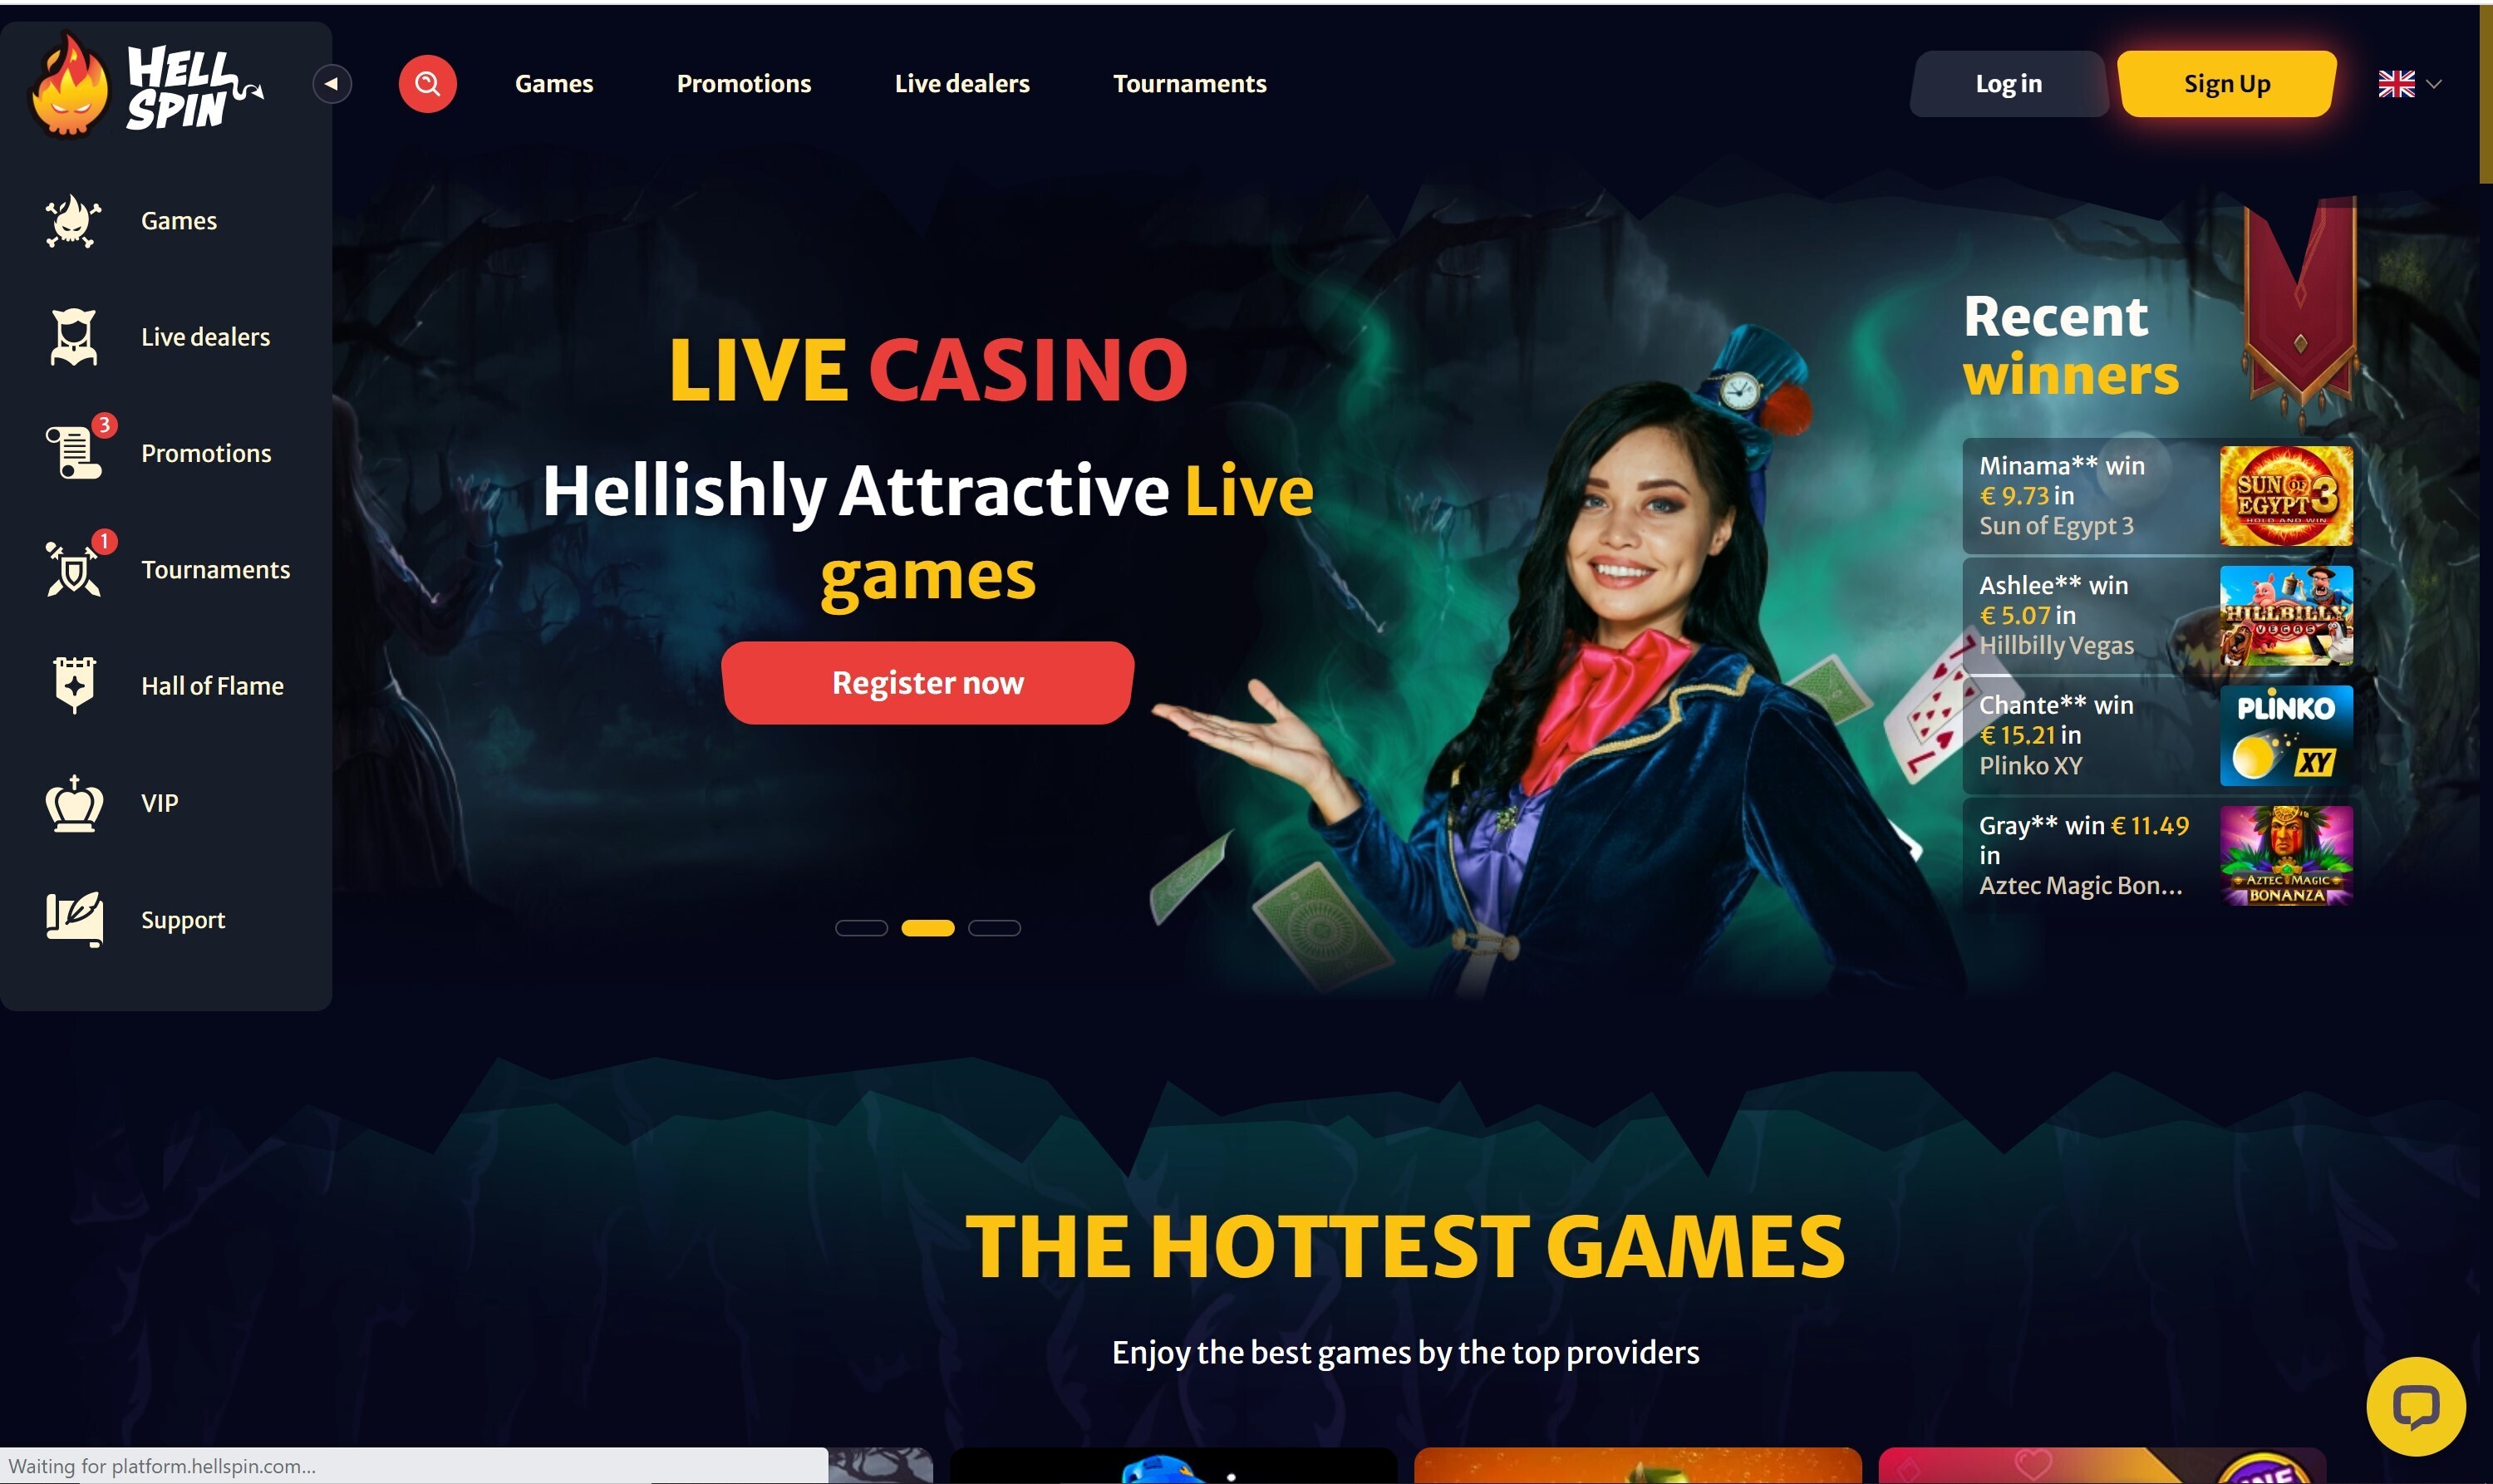 How To Lose Money With play bitcoin casino online